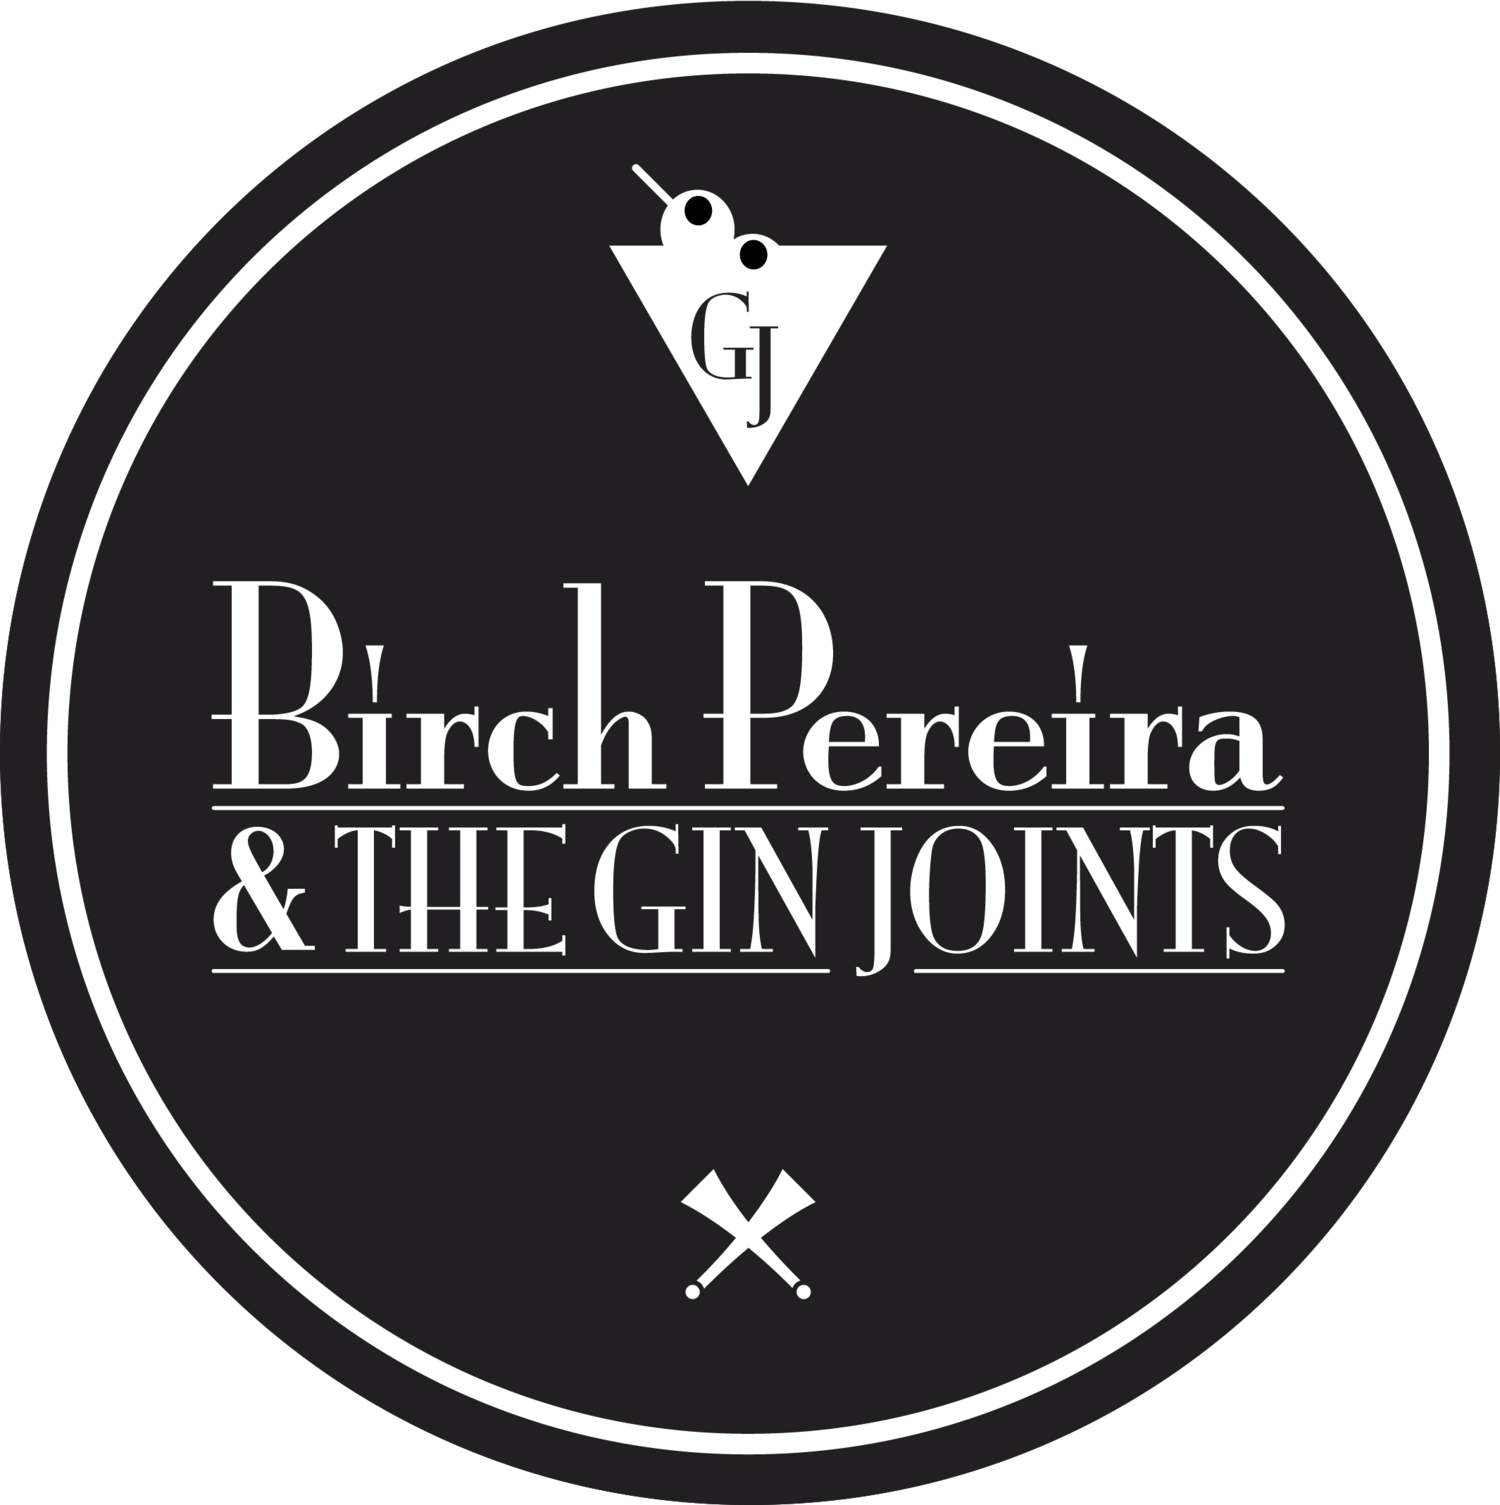 Birch Pereira & the Gin Joints